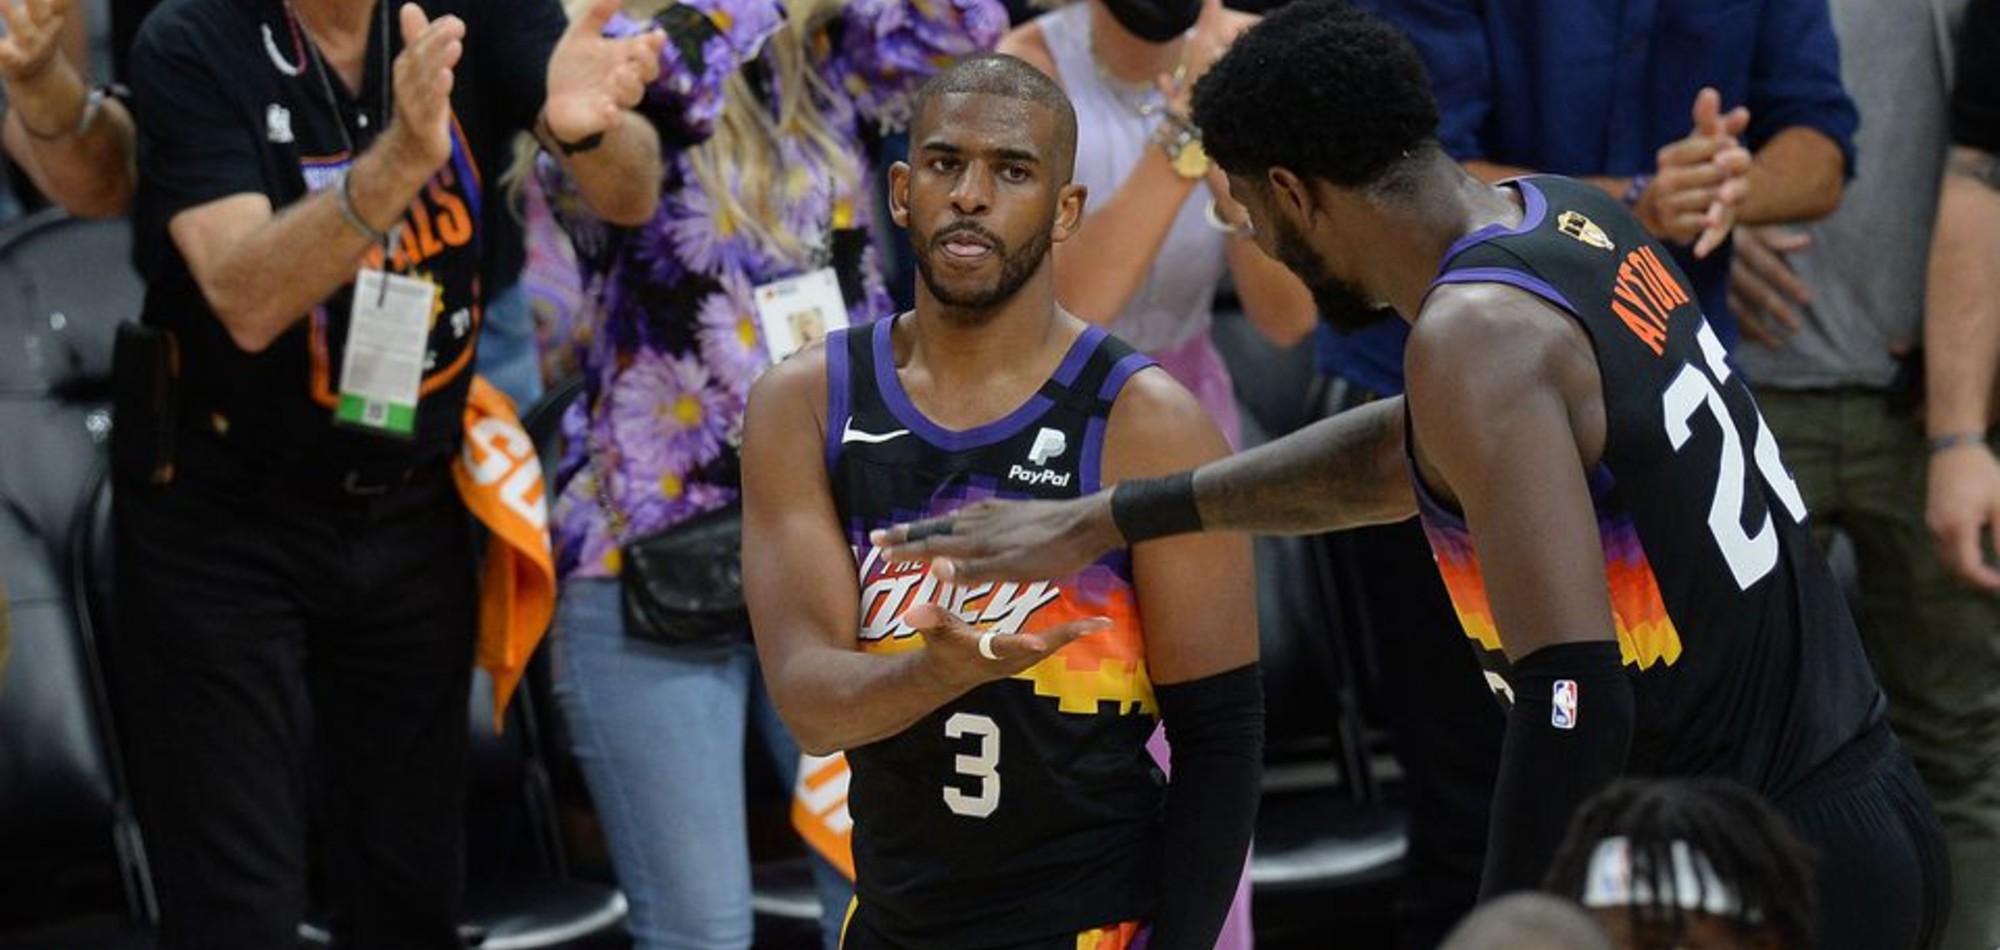 Paul leads the Suns to a game 1 win over the Bucks in the NBA Finals